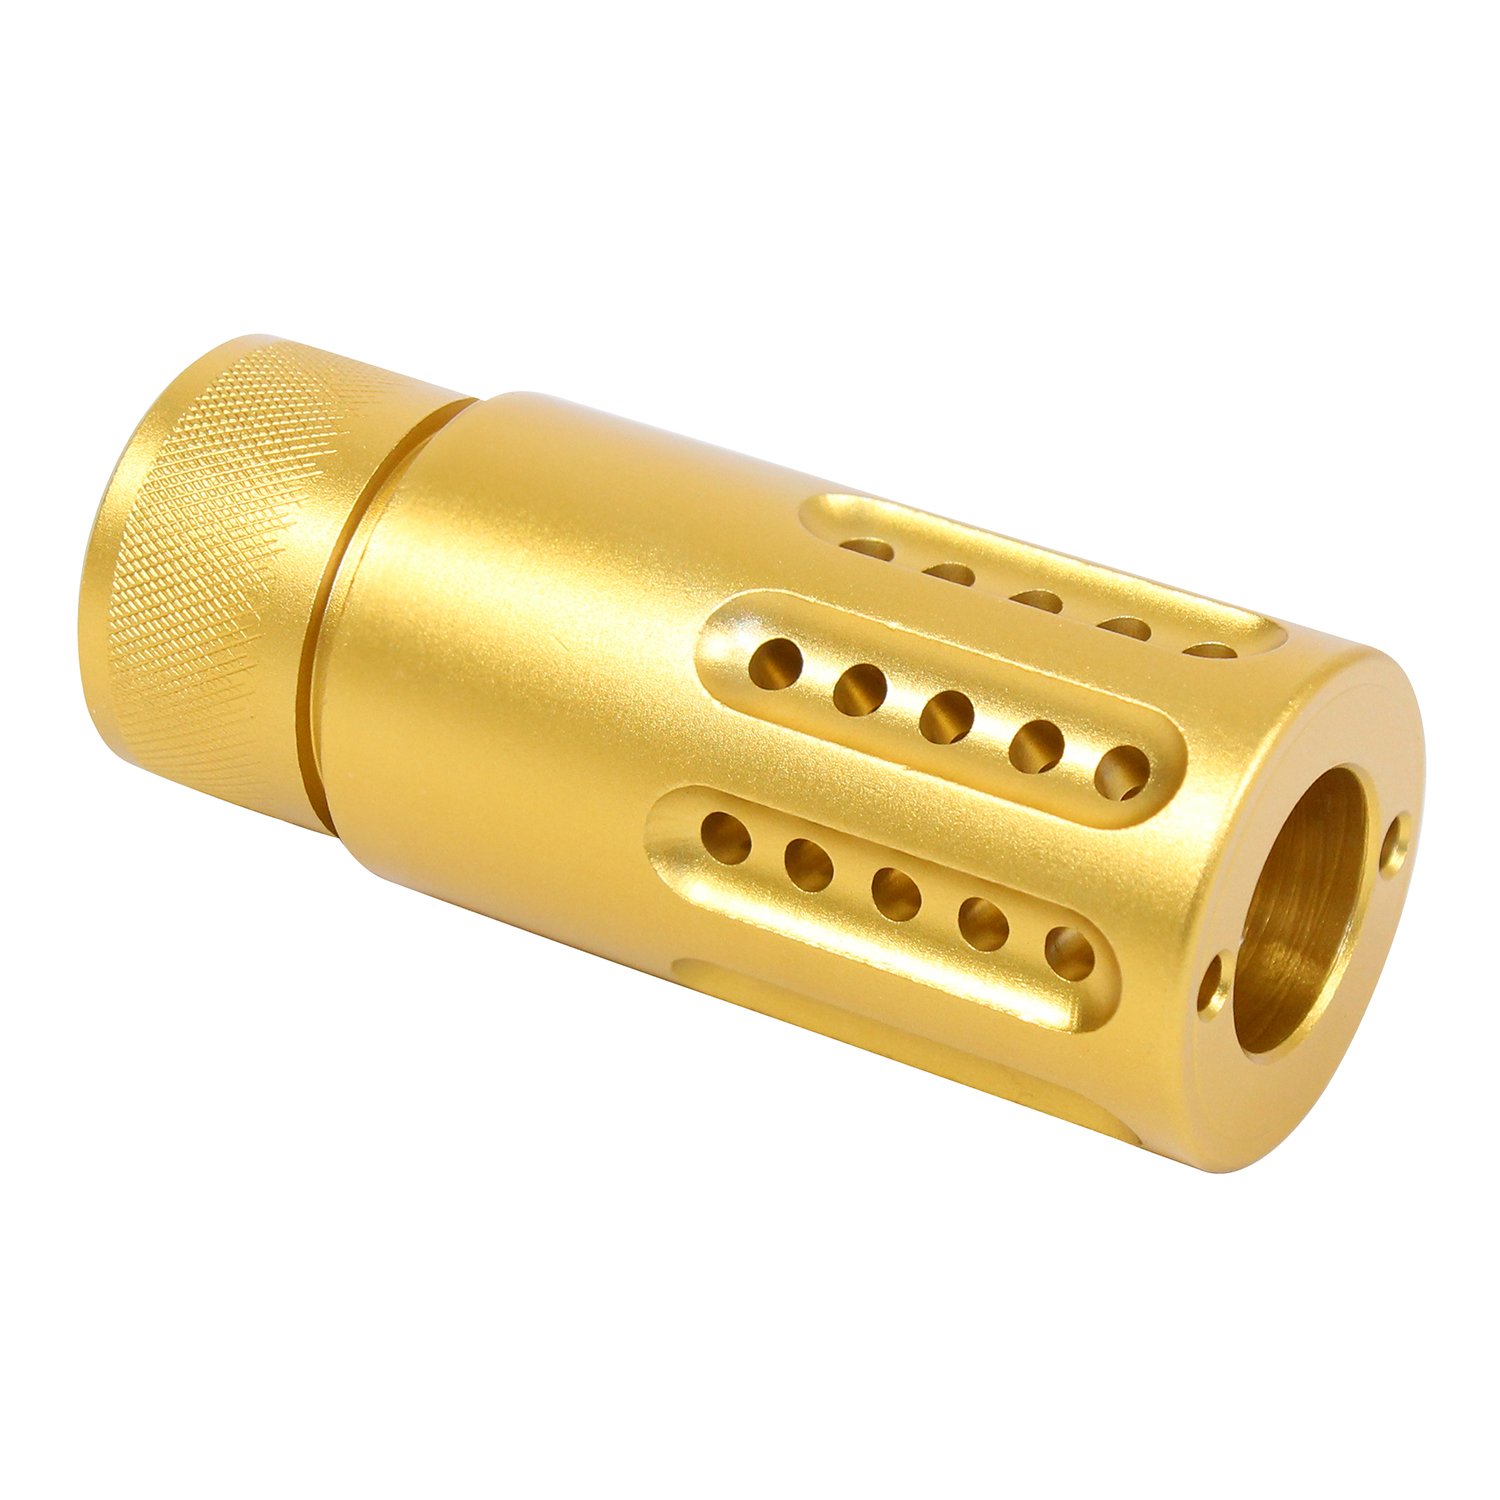 AR-15 .308 cal muzzle brake and shroud in radiant anodized gold.